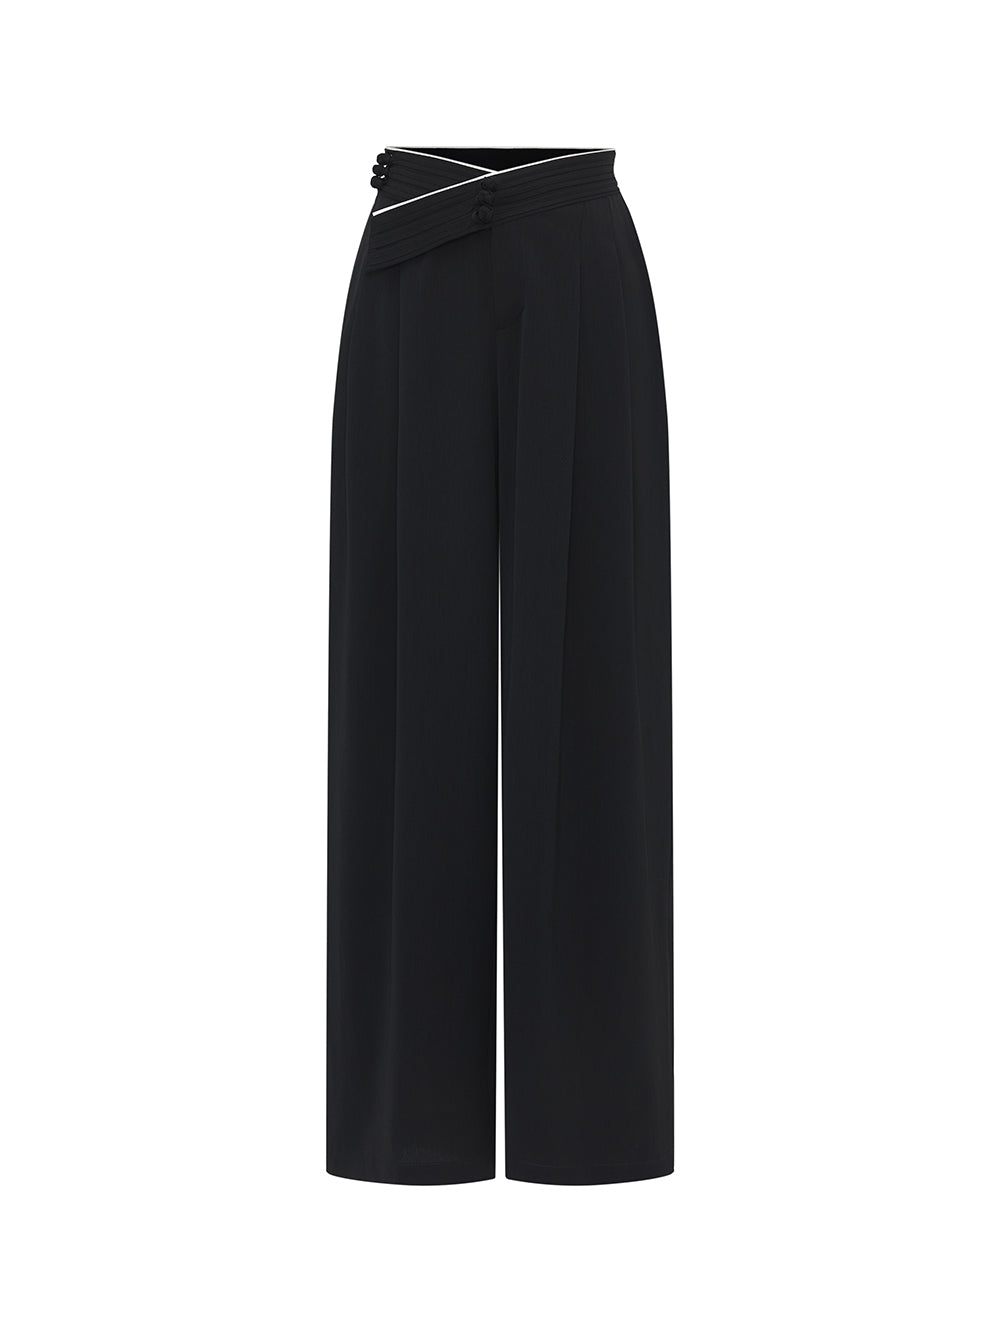 MUKZIN Black Loose Suit Pants with Crossover Design at the Waist